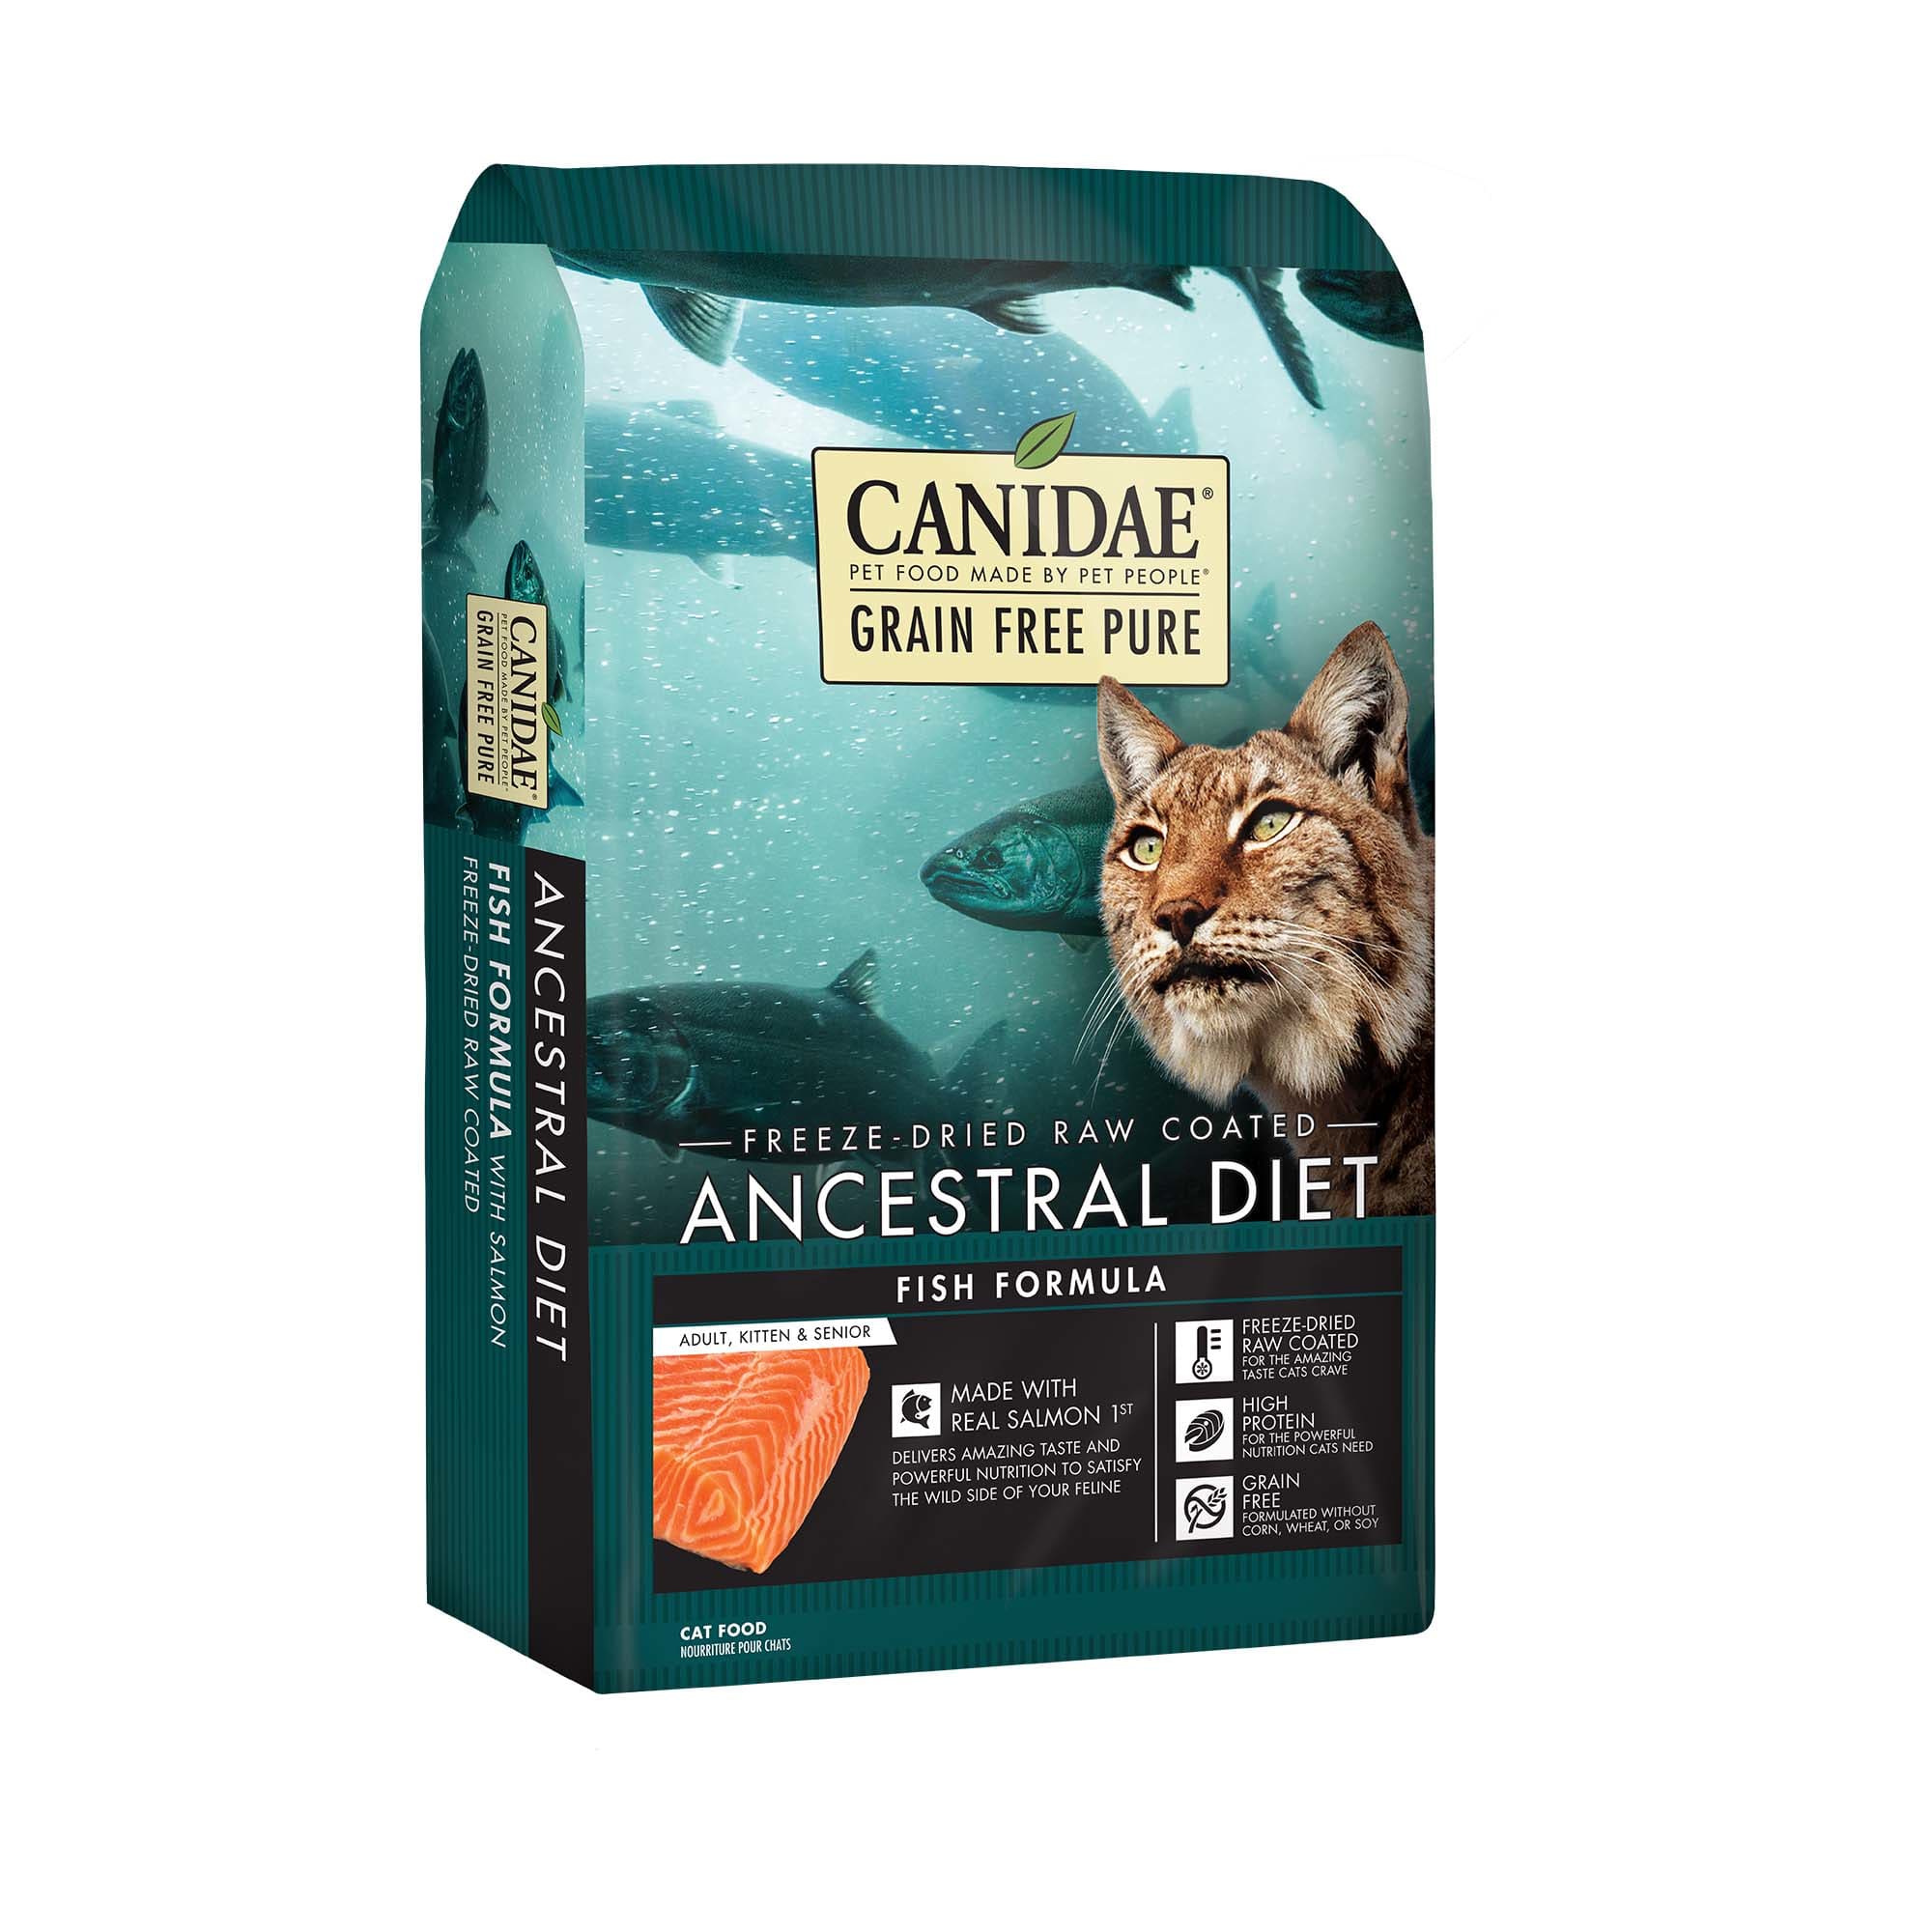 CANIDAE Grain Free PURE Ancestral Diet Salmon Dry Cat Food eBay